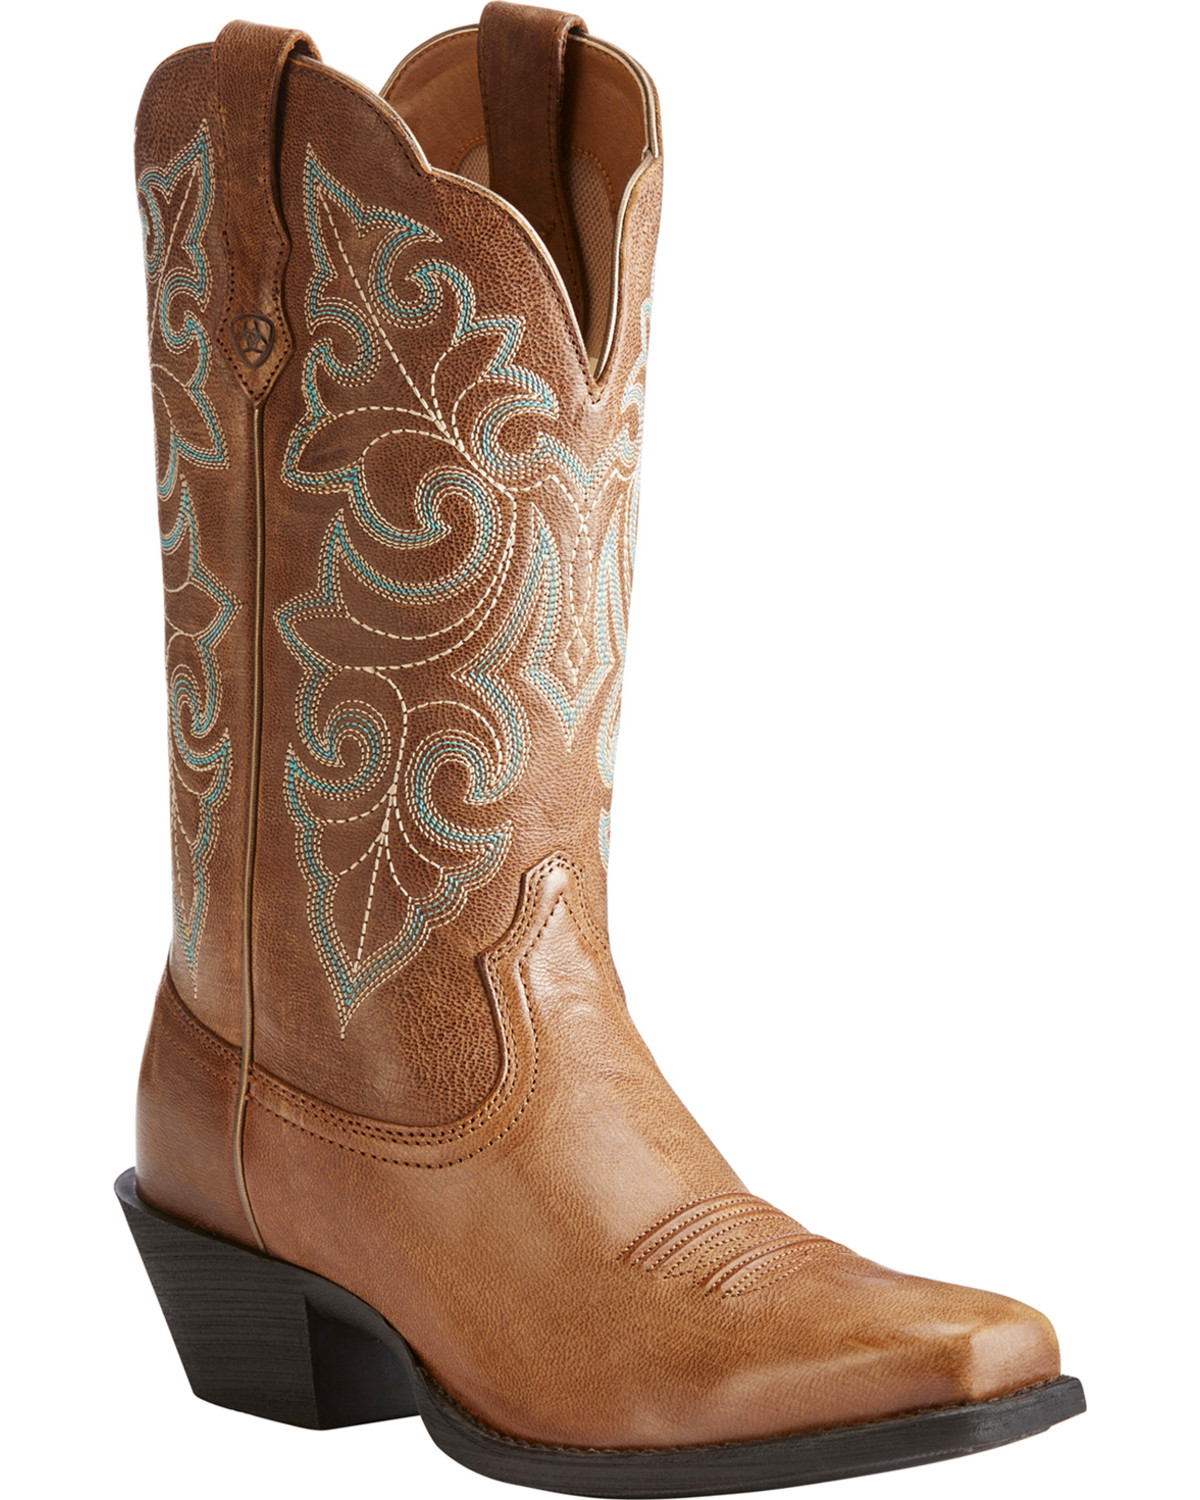 Ariat Women's Tan Leather Western Boots 